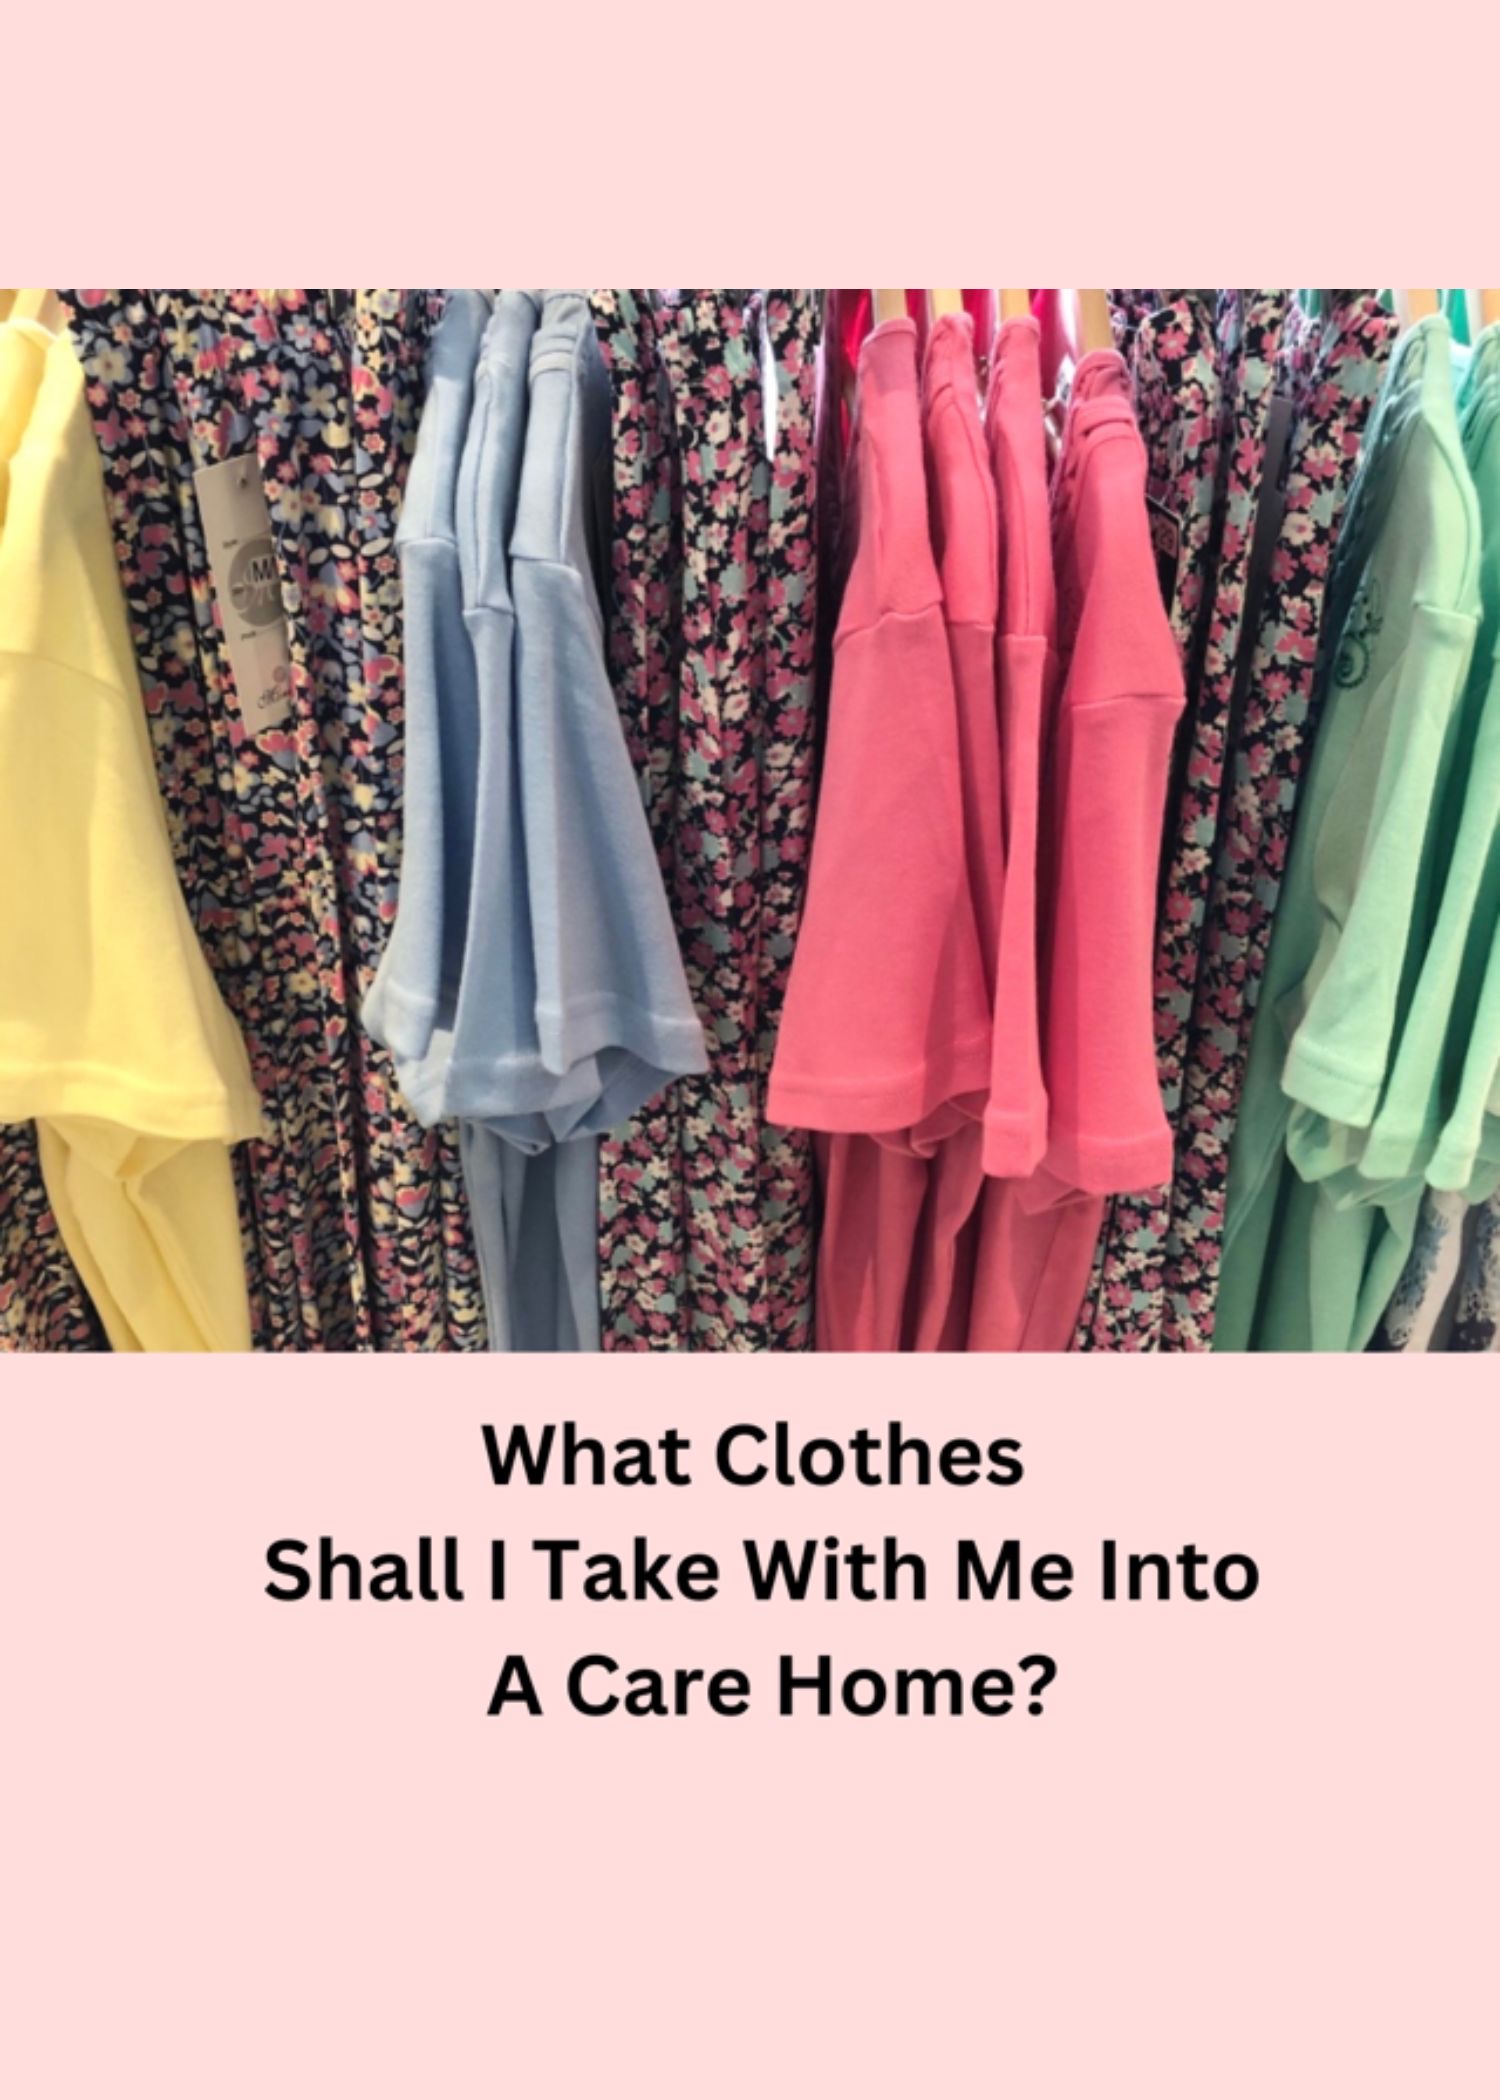 Care Home Clothing Guide List